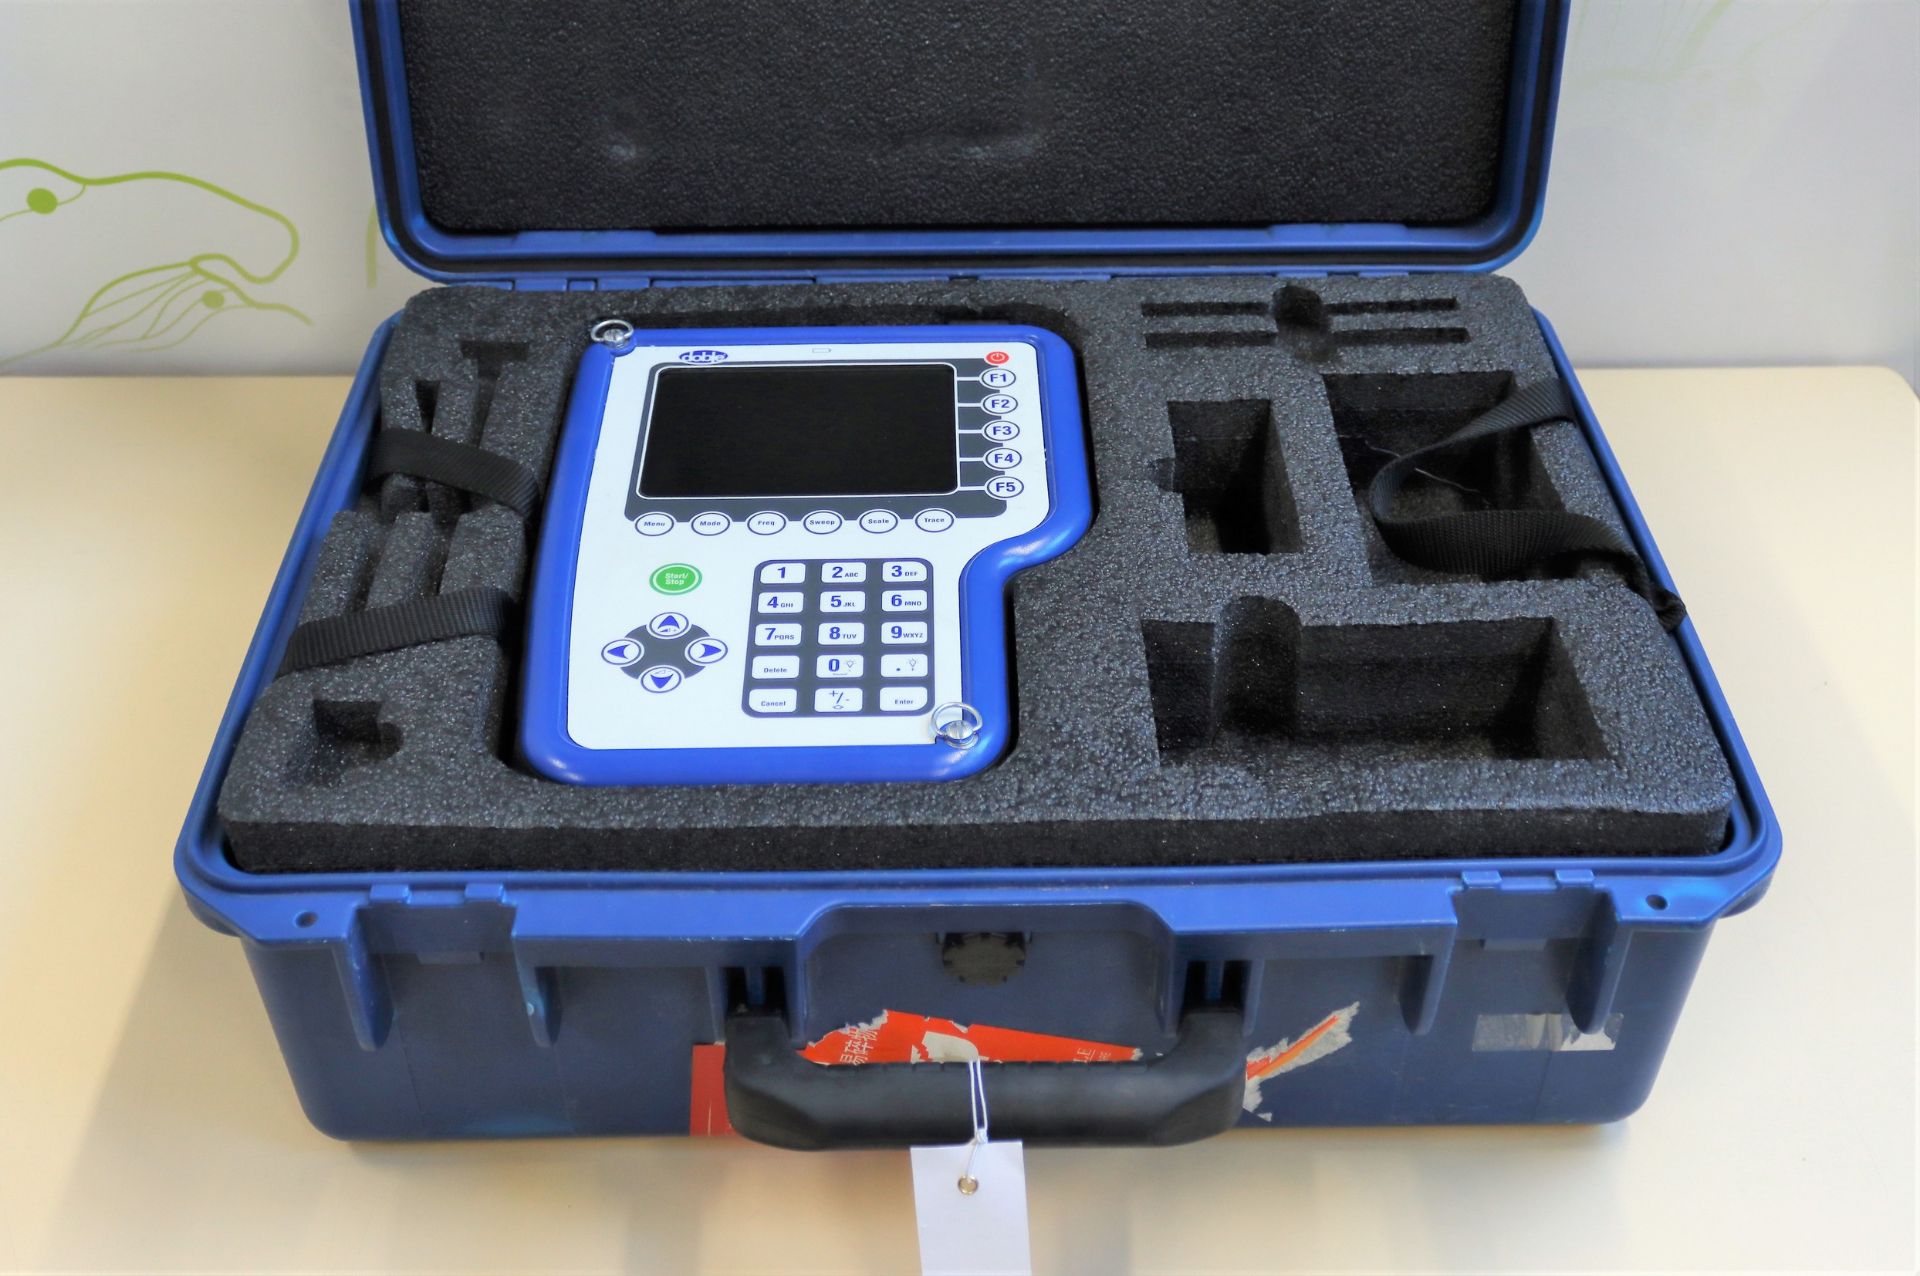 A pre-owned Doble Engineering PDS200 PD Surveyor with EMI Capabilities with foam lined Peli Case (